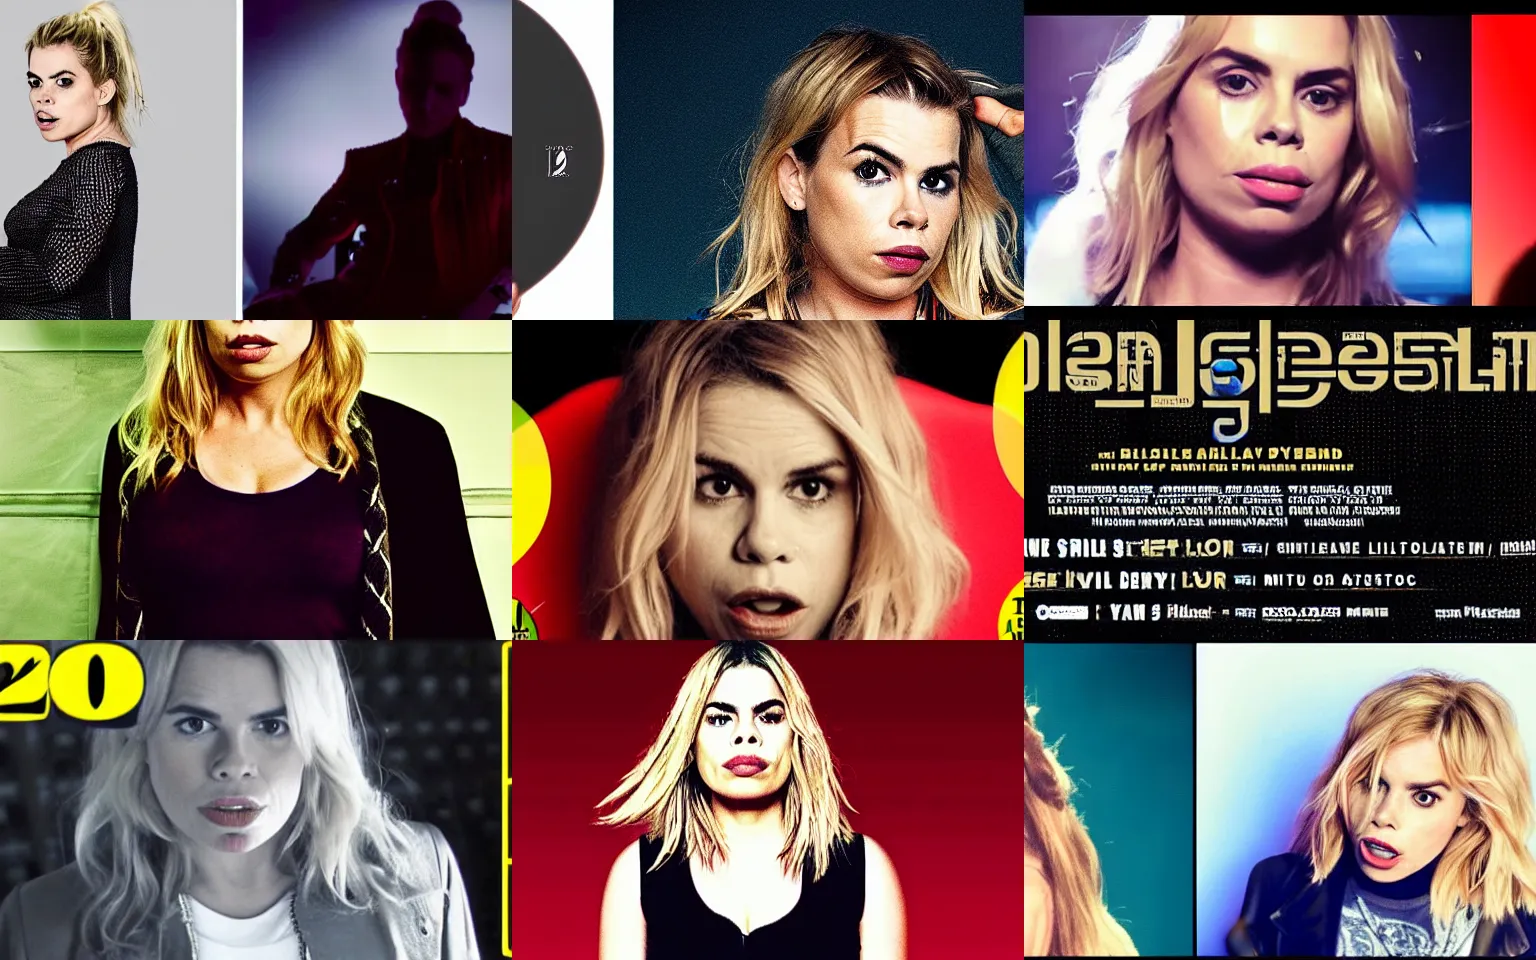 Prompt: 2 5 th anniversary music video, billie piper'day & night ( billie's version )'produced by stargate tor & mikkel for virgin records, 2 0 2 5 popstar comeback single